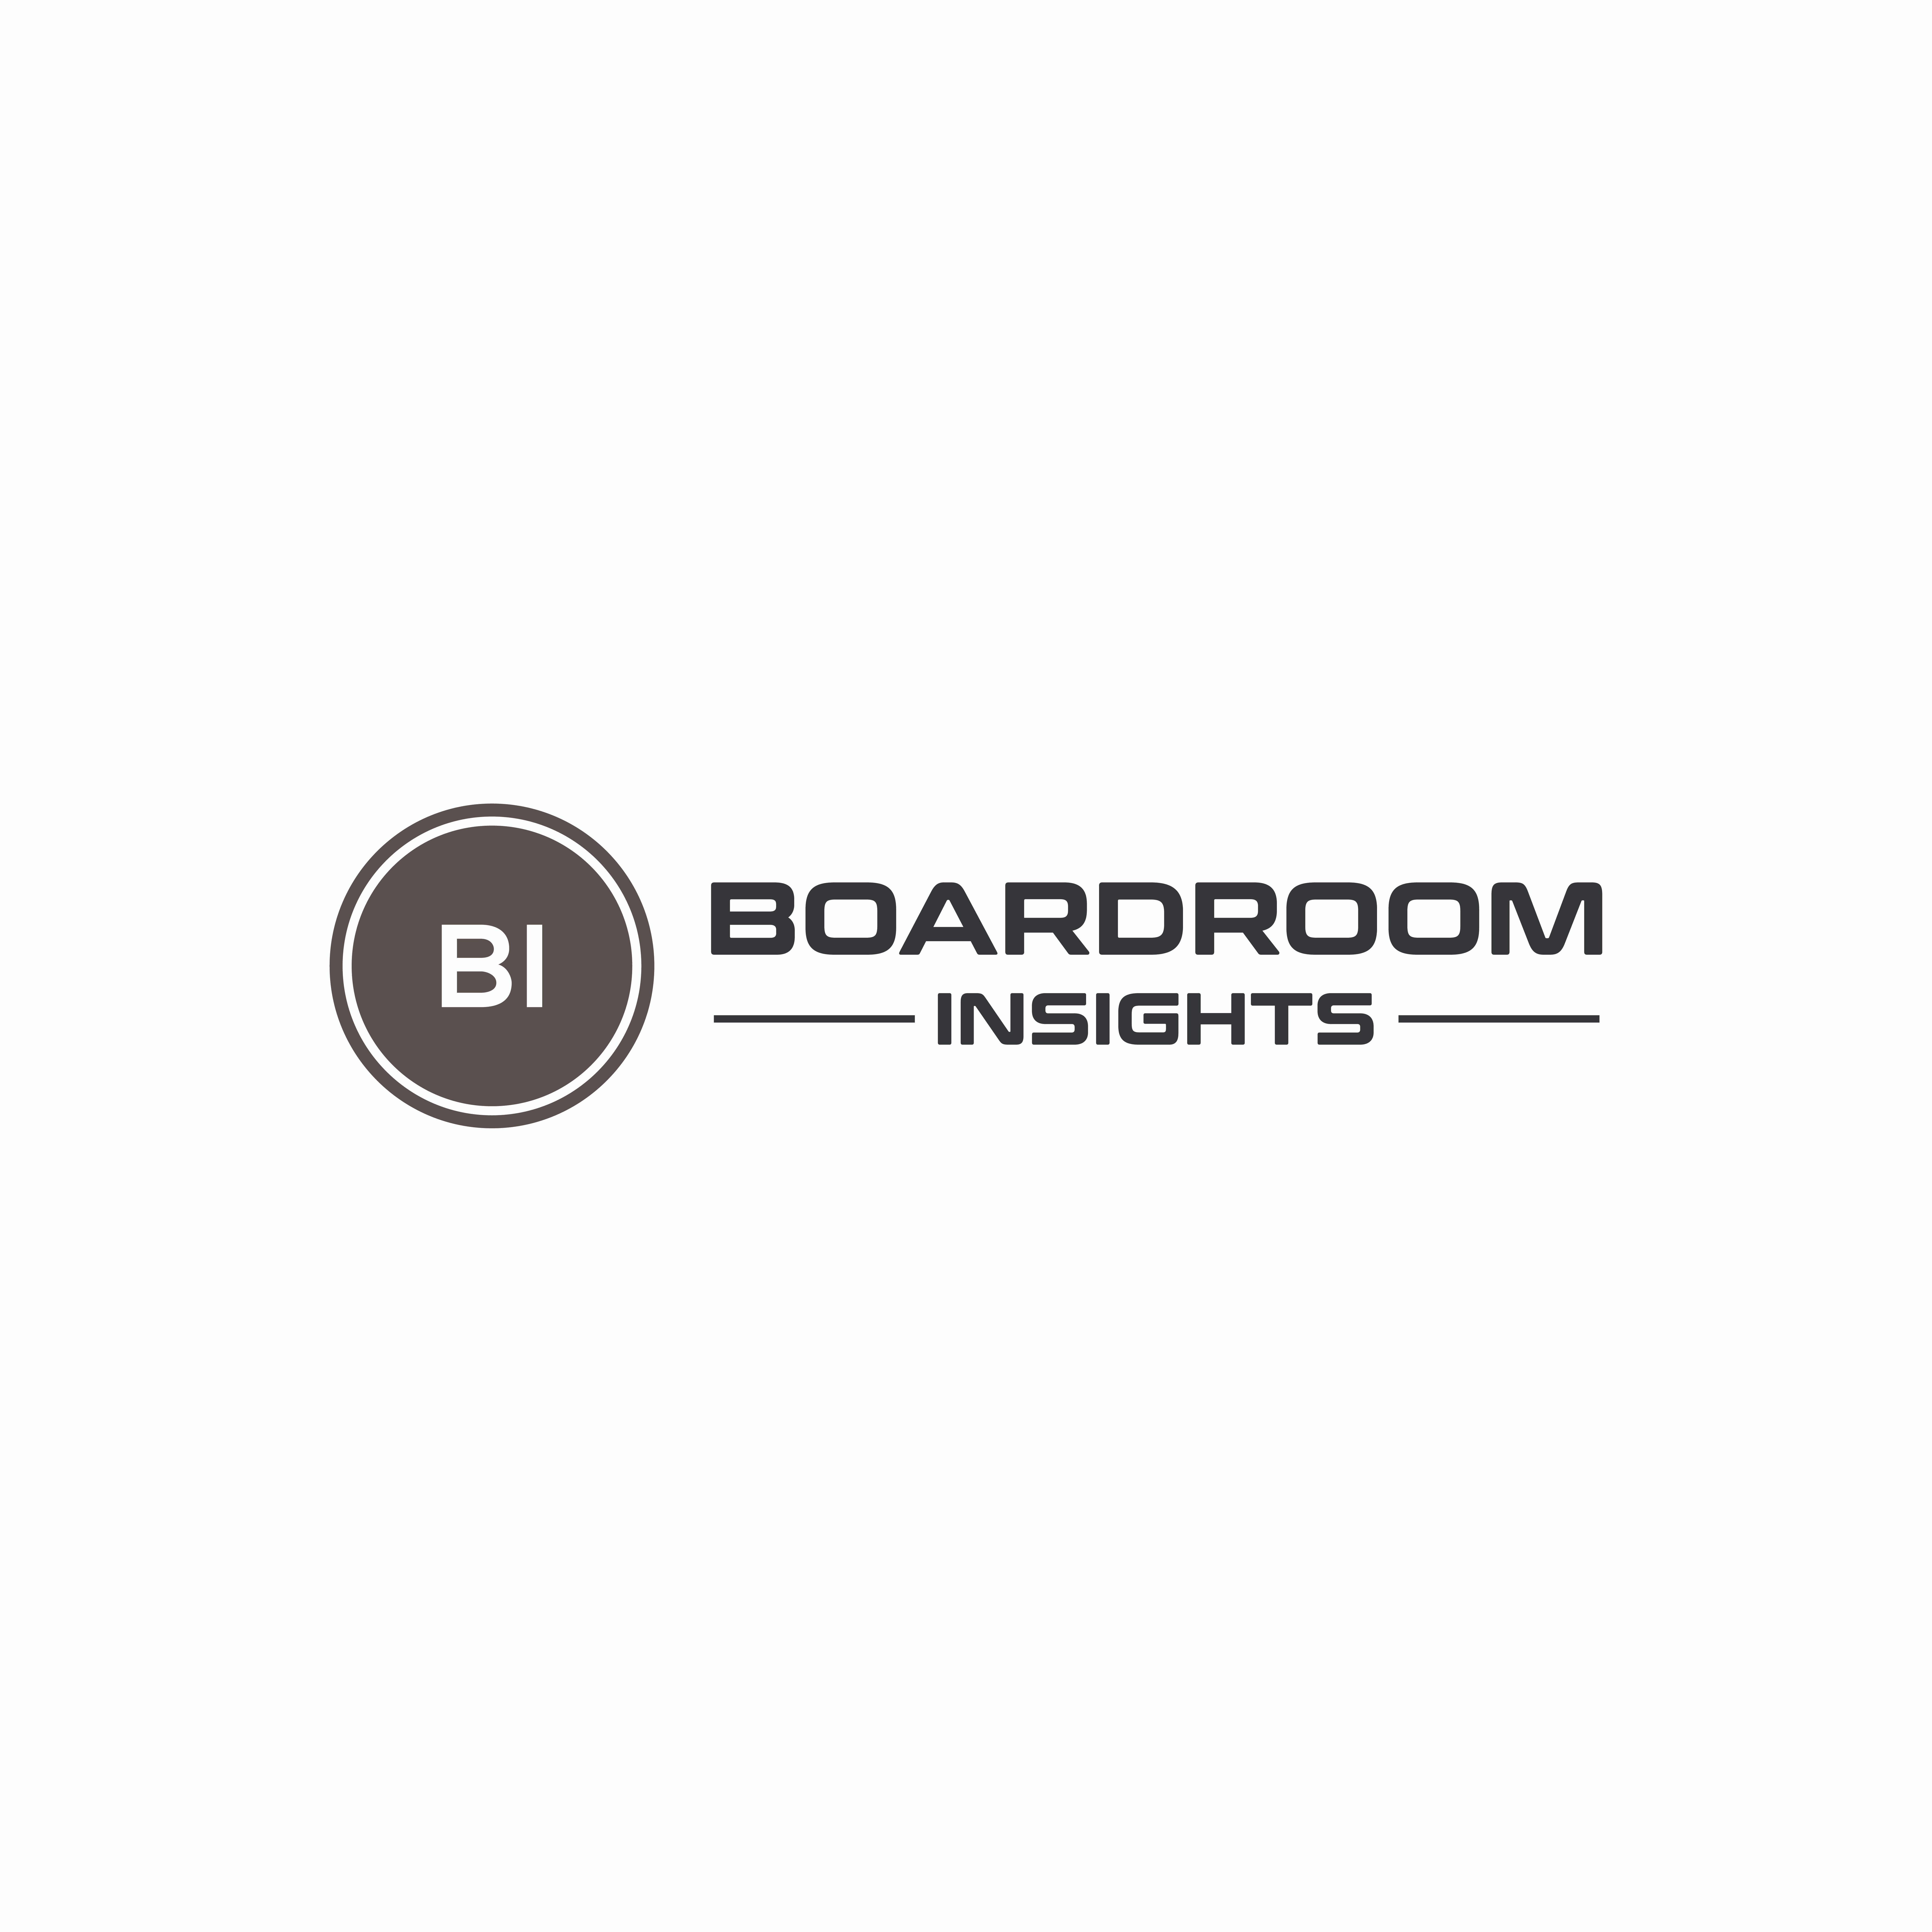 Free Boardroom-BI Proof of Concept for Booth Attendees 146